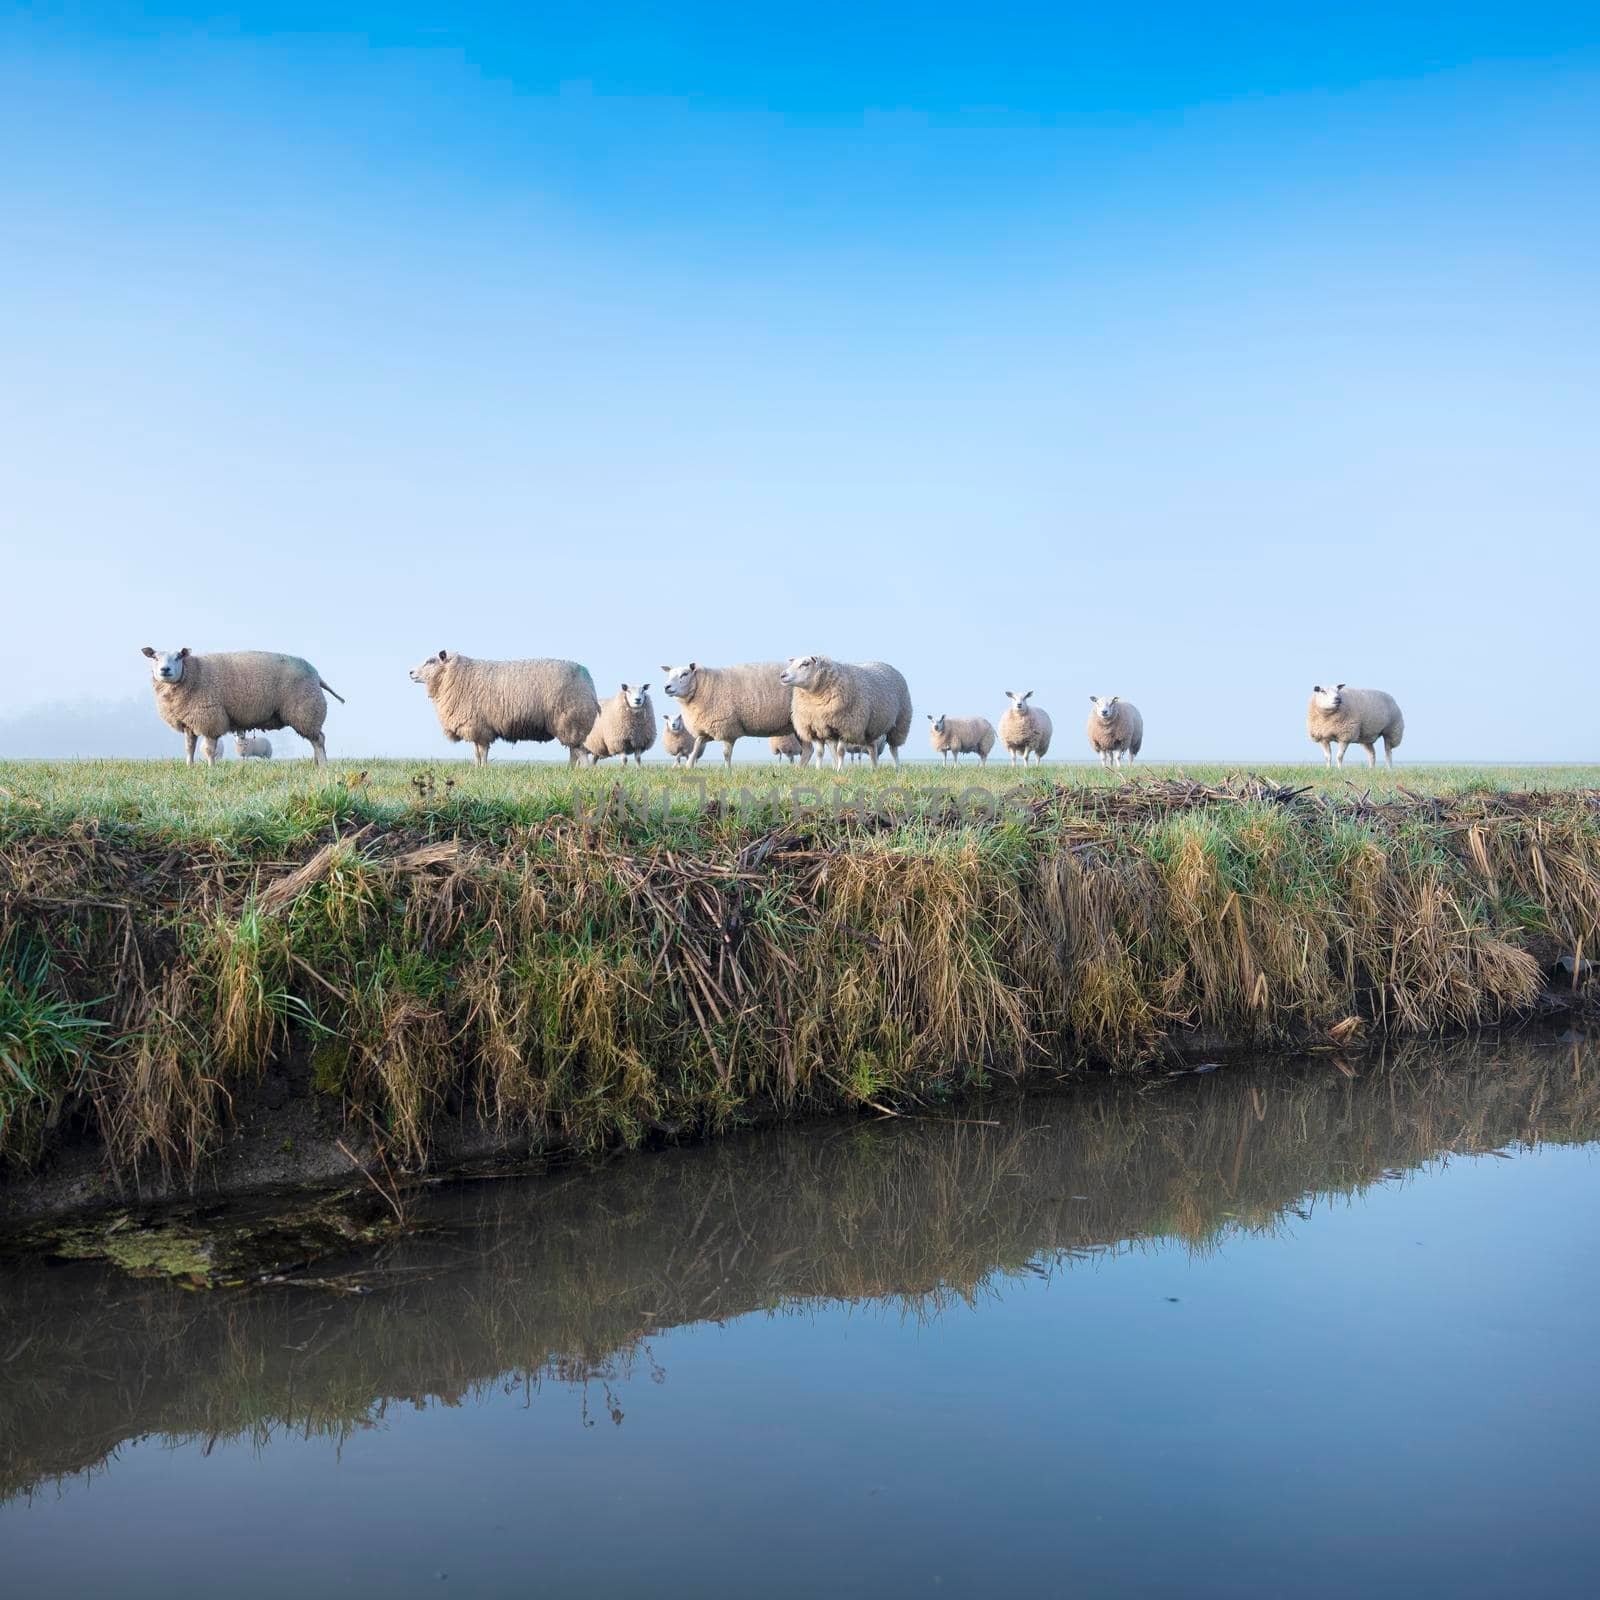 sheep in foggy green meadow near canal in the netherlands under blue sky